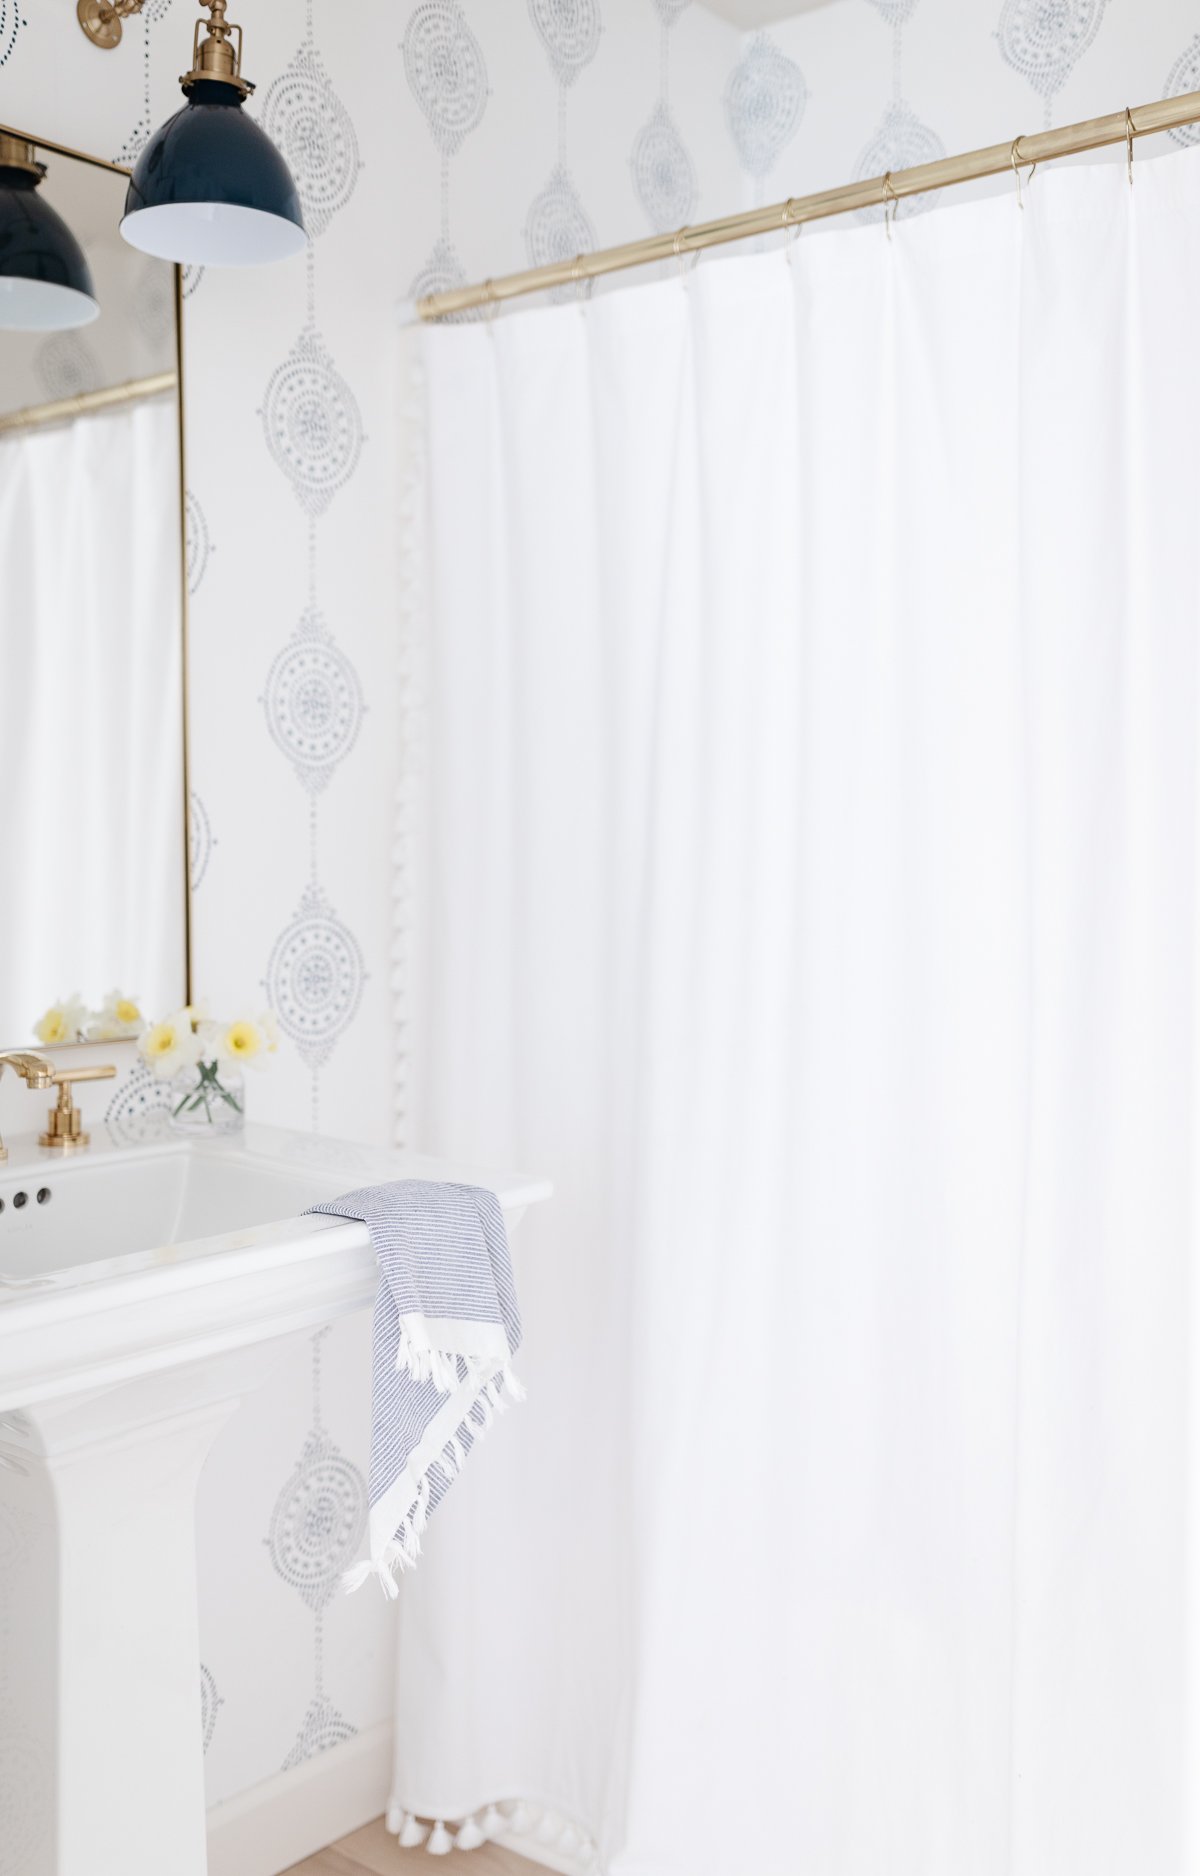 A bathroom with a white shower curtain and a sink, perfect for serena and lily dupes enthusiasts.